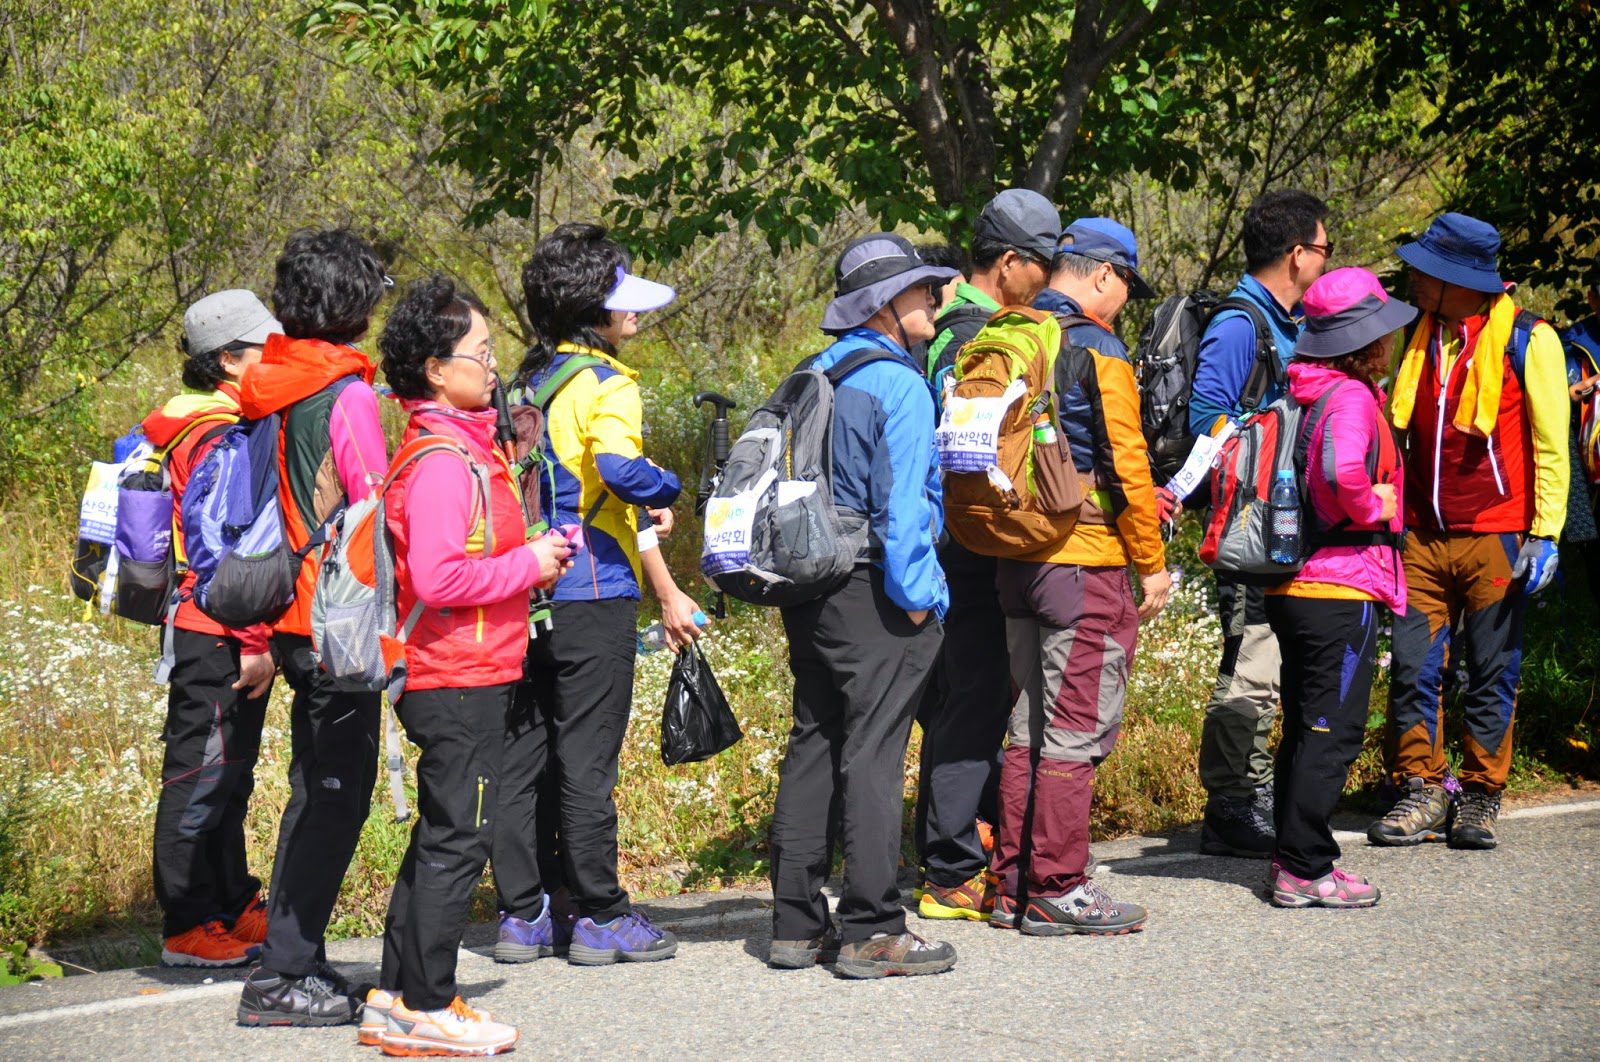 Koreans are all about neon hiking gear